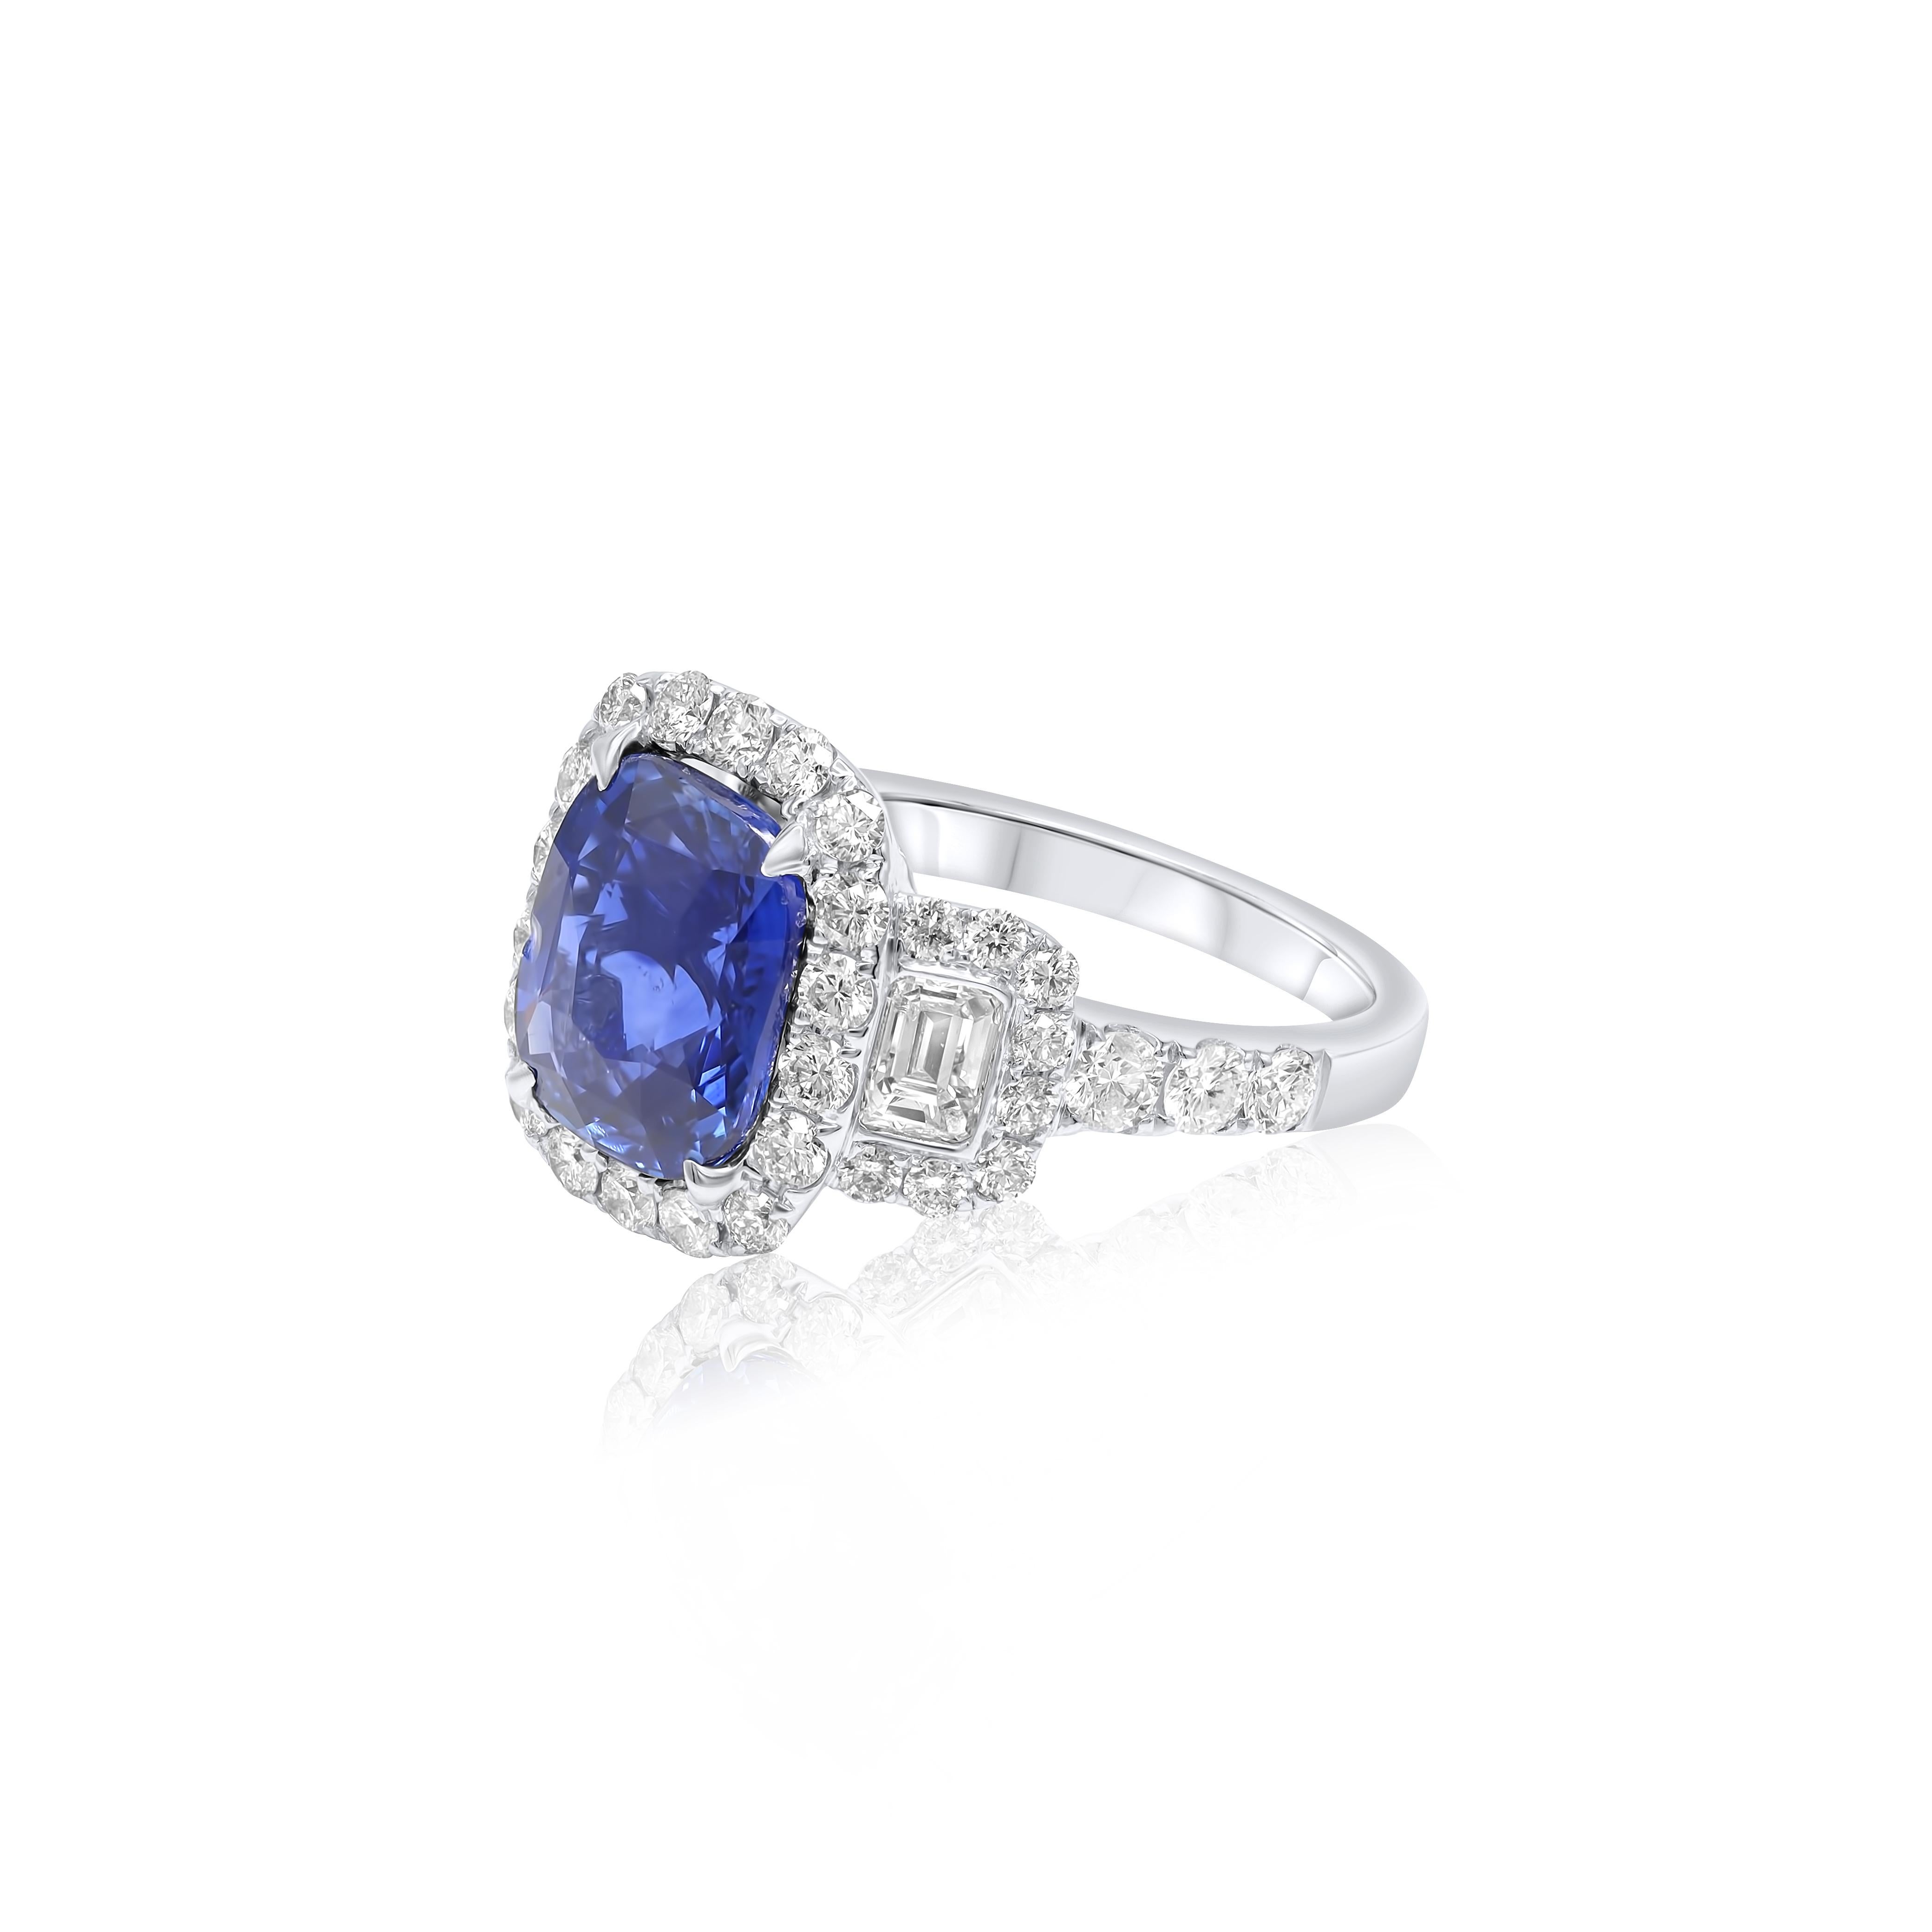 Cushion Cut Diana M. 18 kt white gold sapphire diamond ring featuring a 3.58 ct  For Sale